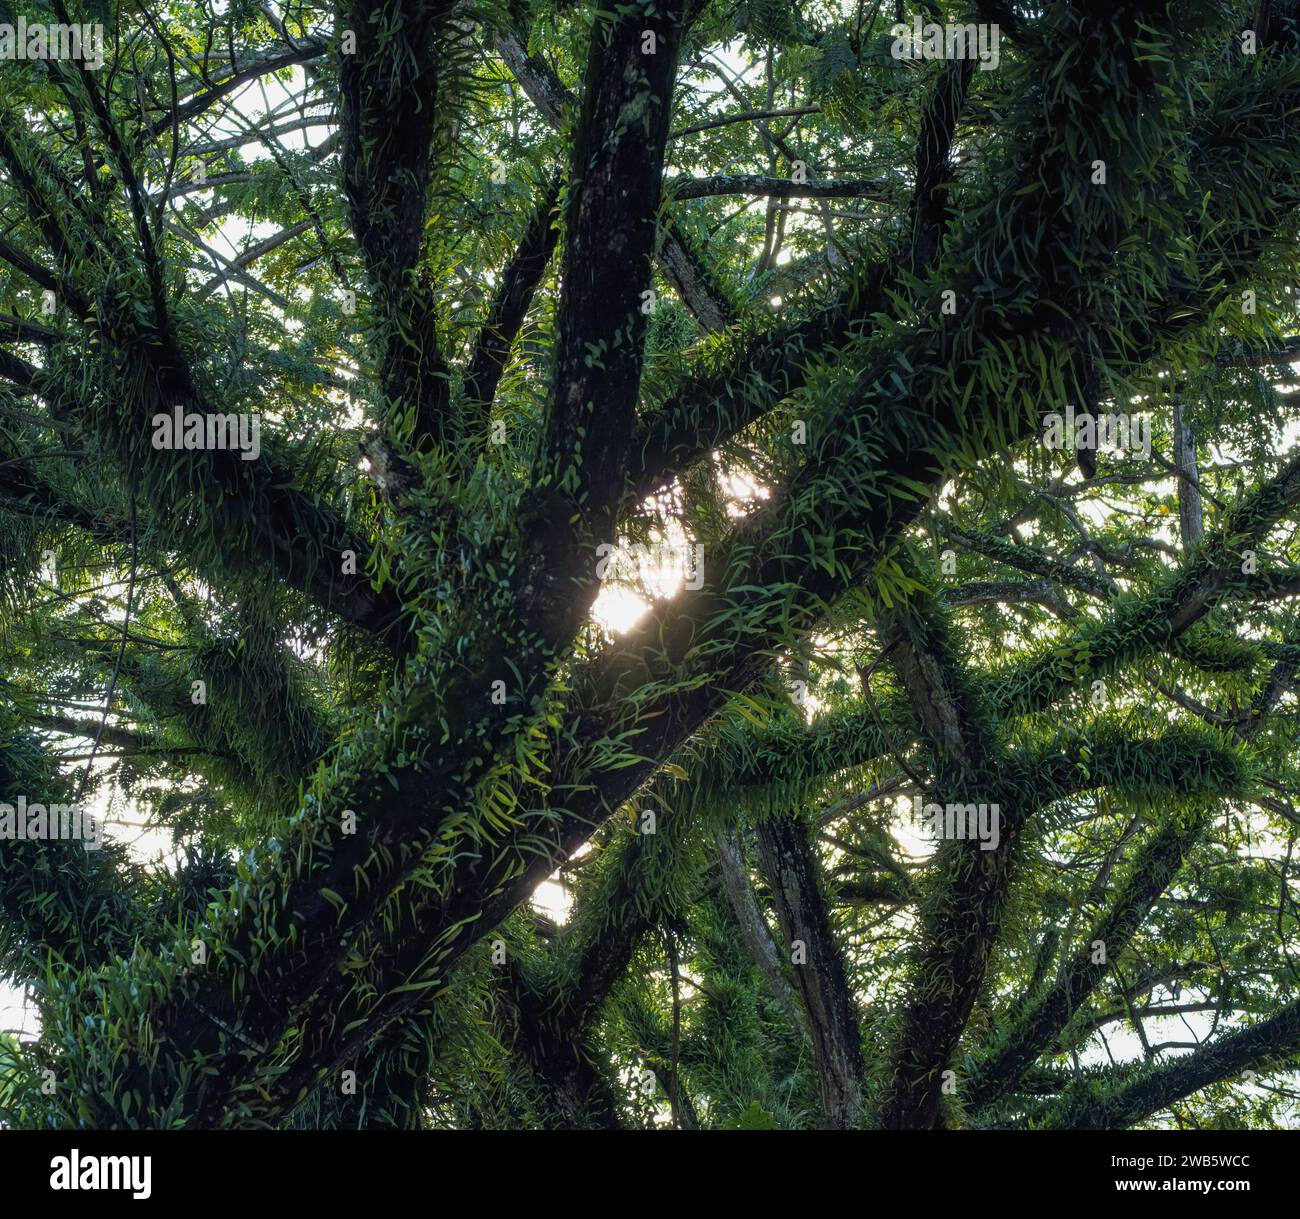 the Loranthus covering all over the body of the trees Stock Photo